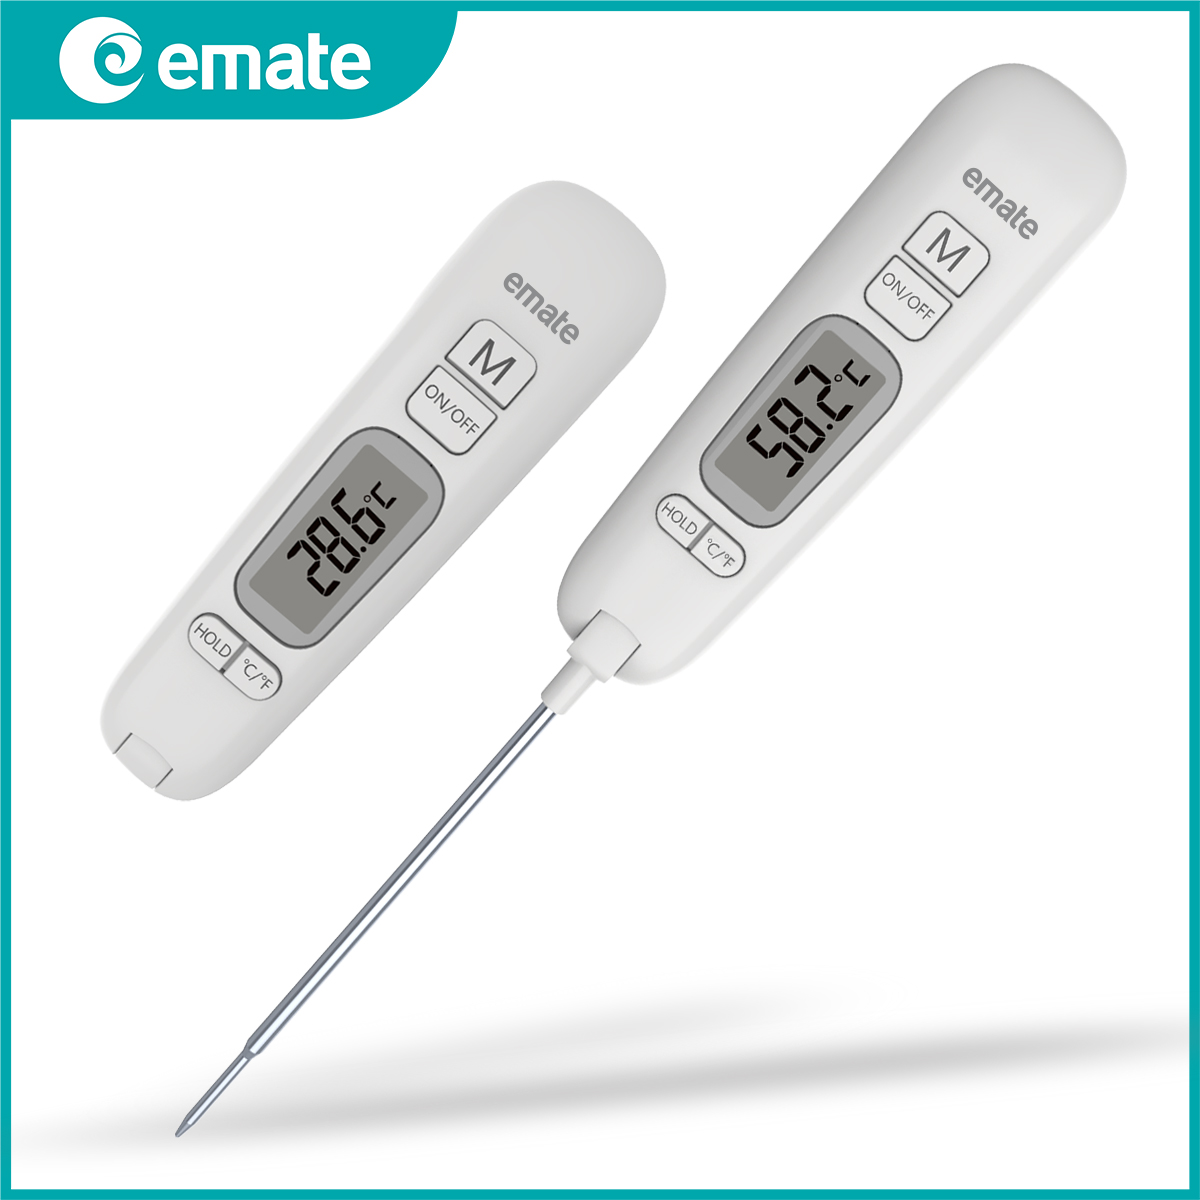 Foldable Food Thermometer